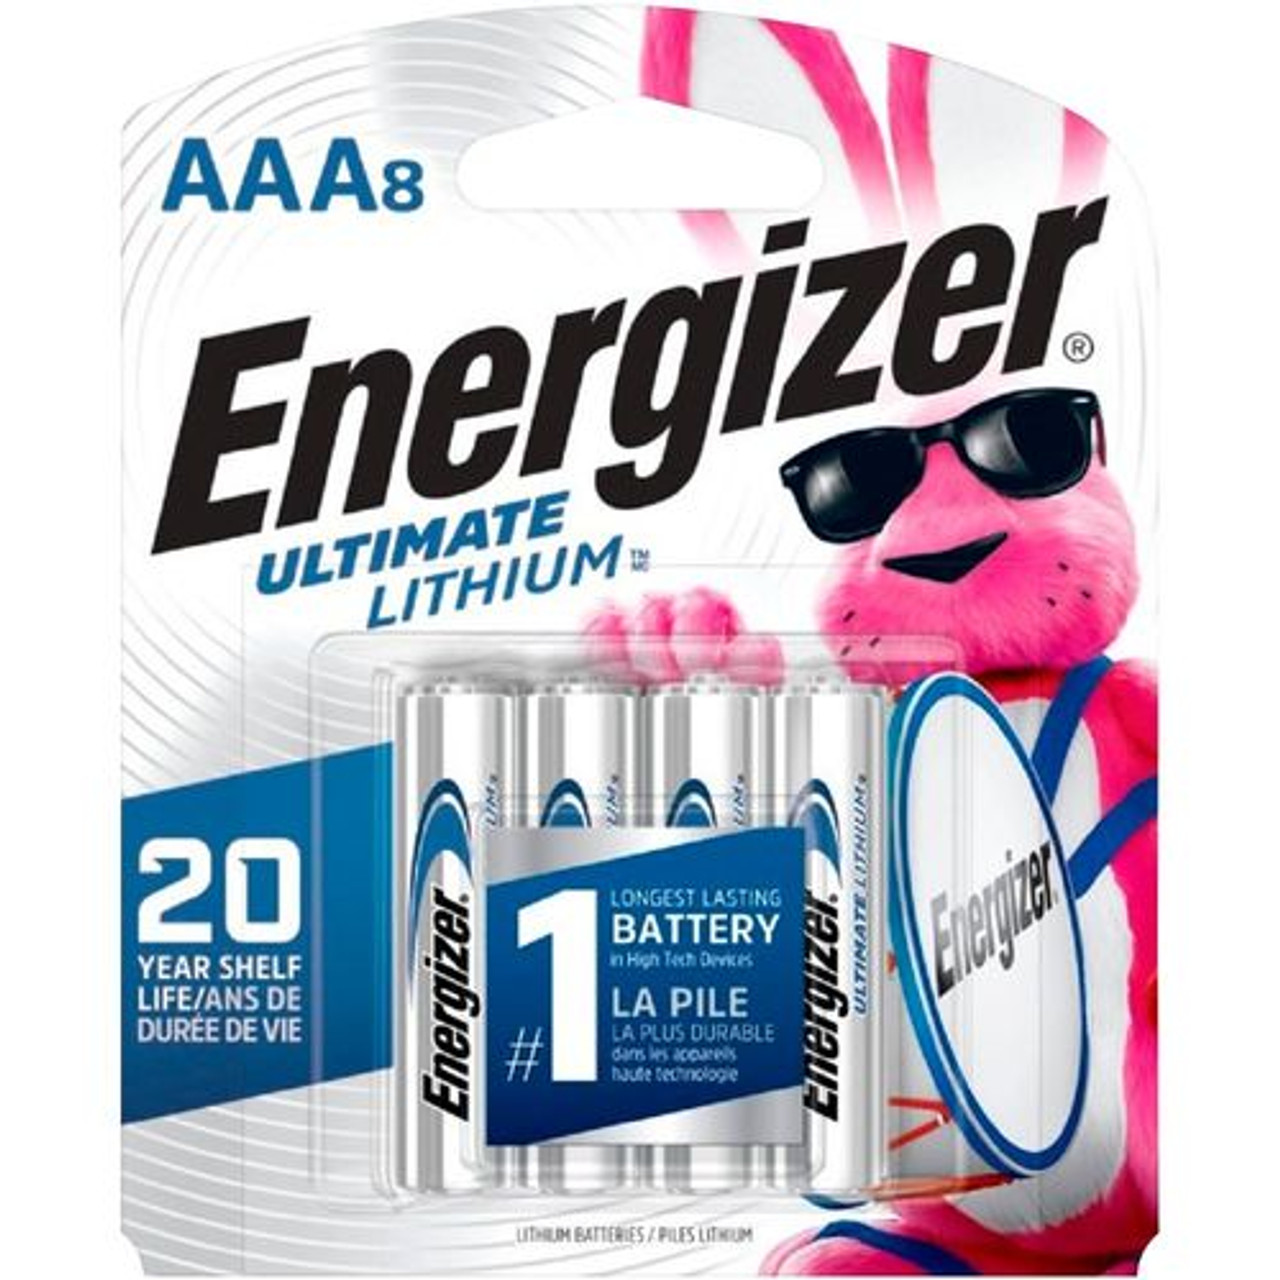 Energizer - Ultimate Lithium AAA Batteries (8-Pack)